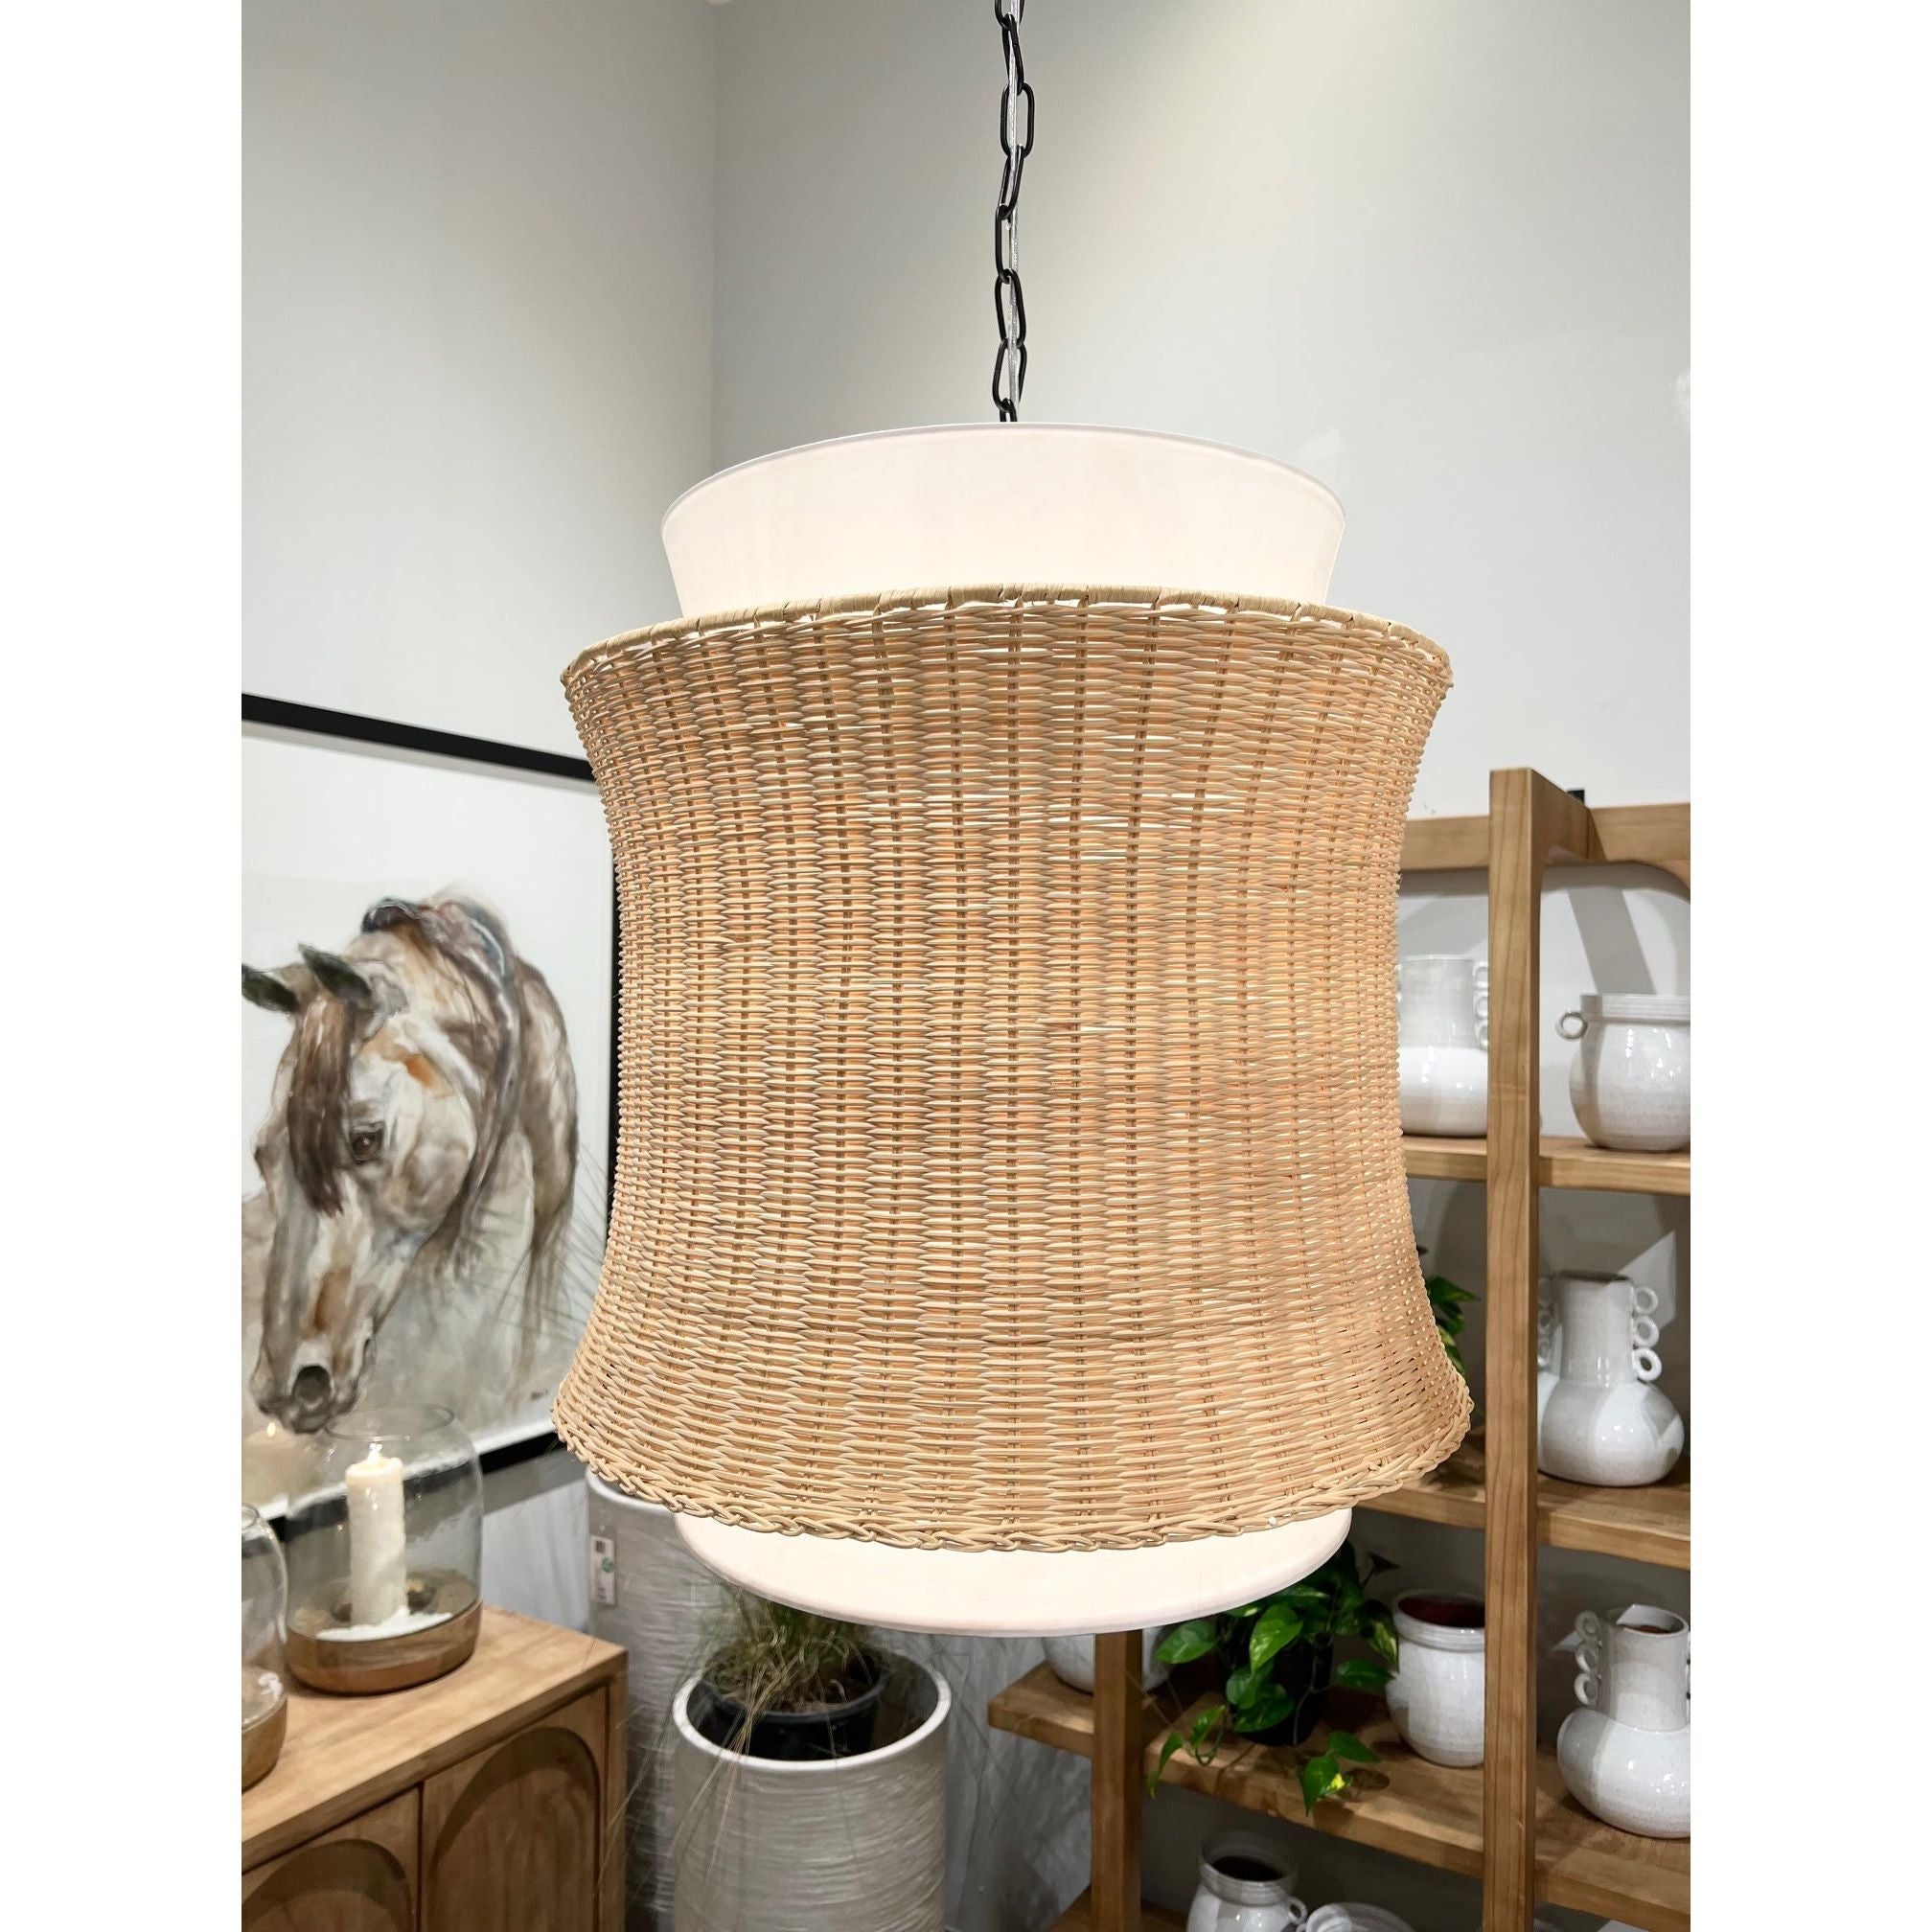 Made of fabric and beautifully natural woven rattan, the Chrisley Pendant Light is a wonderfully modern and airy fixture to hang above your kitchen island or bedroom nightstands. Amethyst Home provides interior design services, furniture, rugs, and lighting in the Austin metro area.